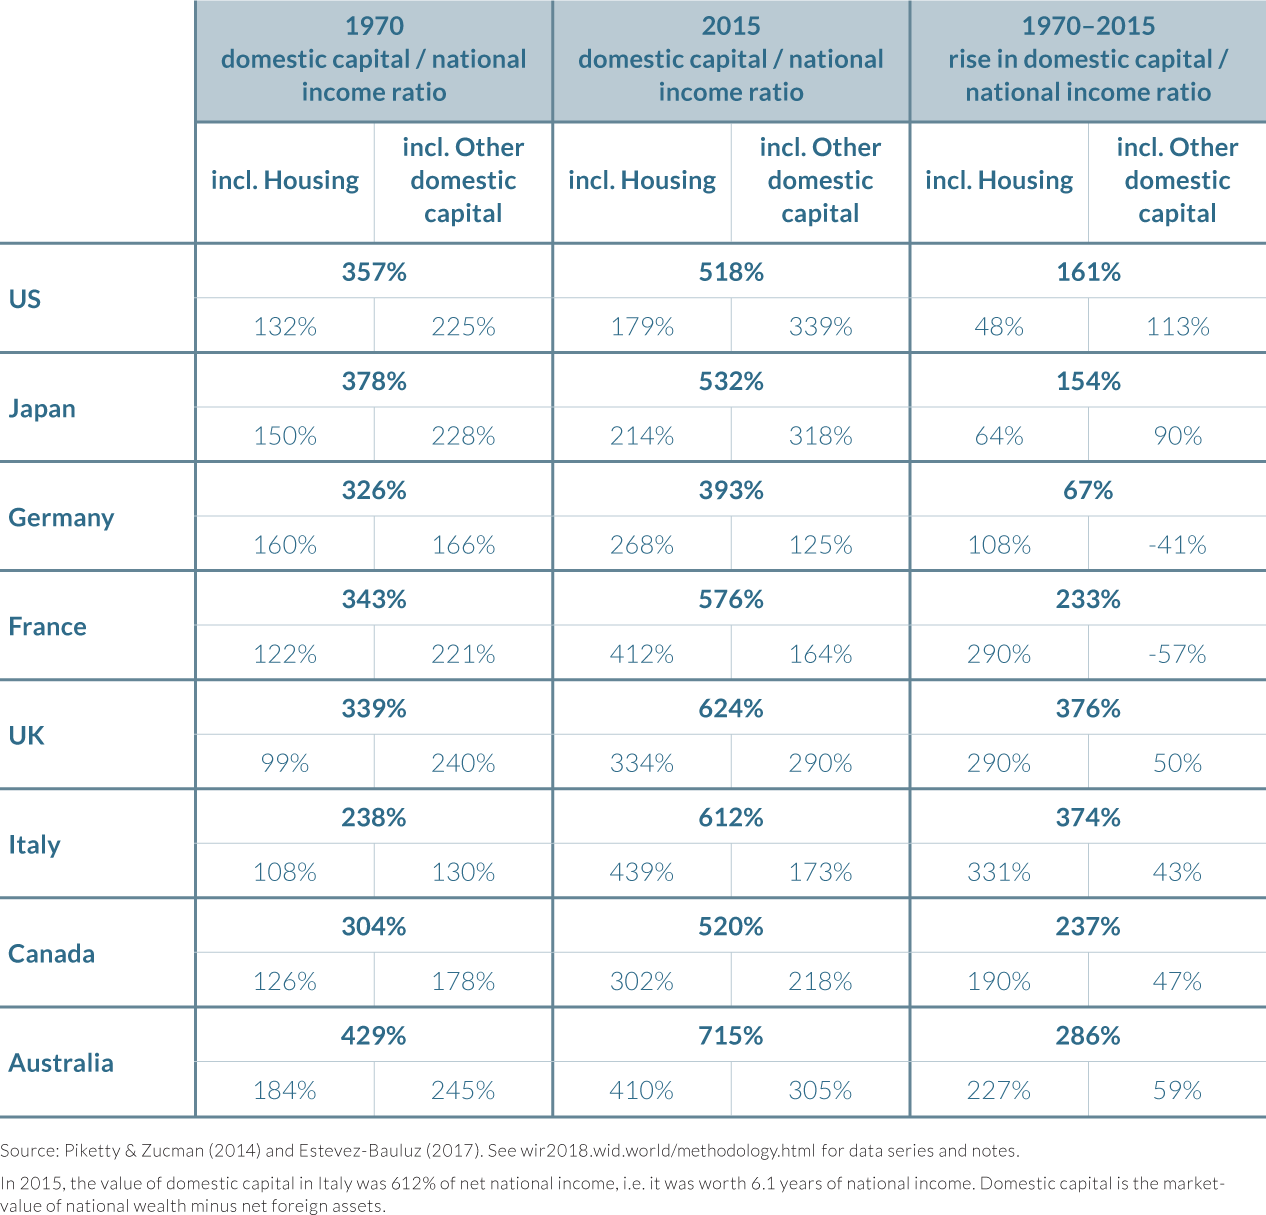 Table 3.2.1 Domestic capital accumulation in rich countries, 1970–2015: Housing vs. other domestic capital